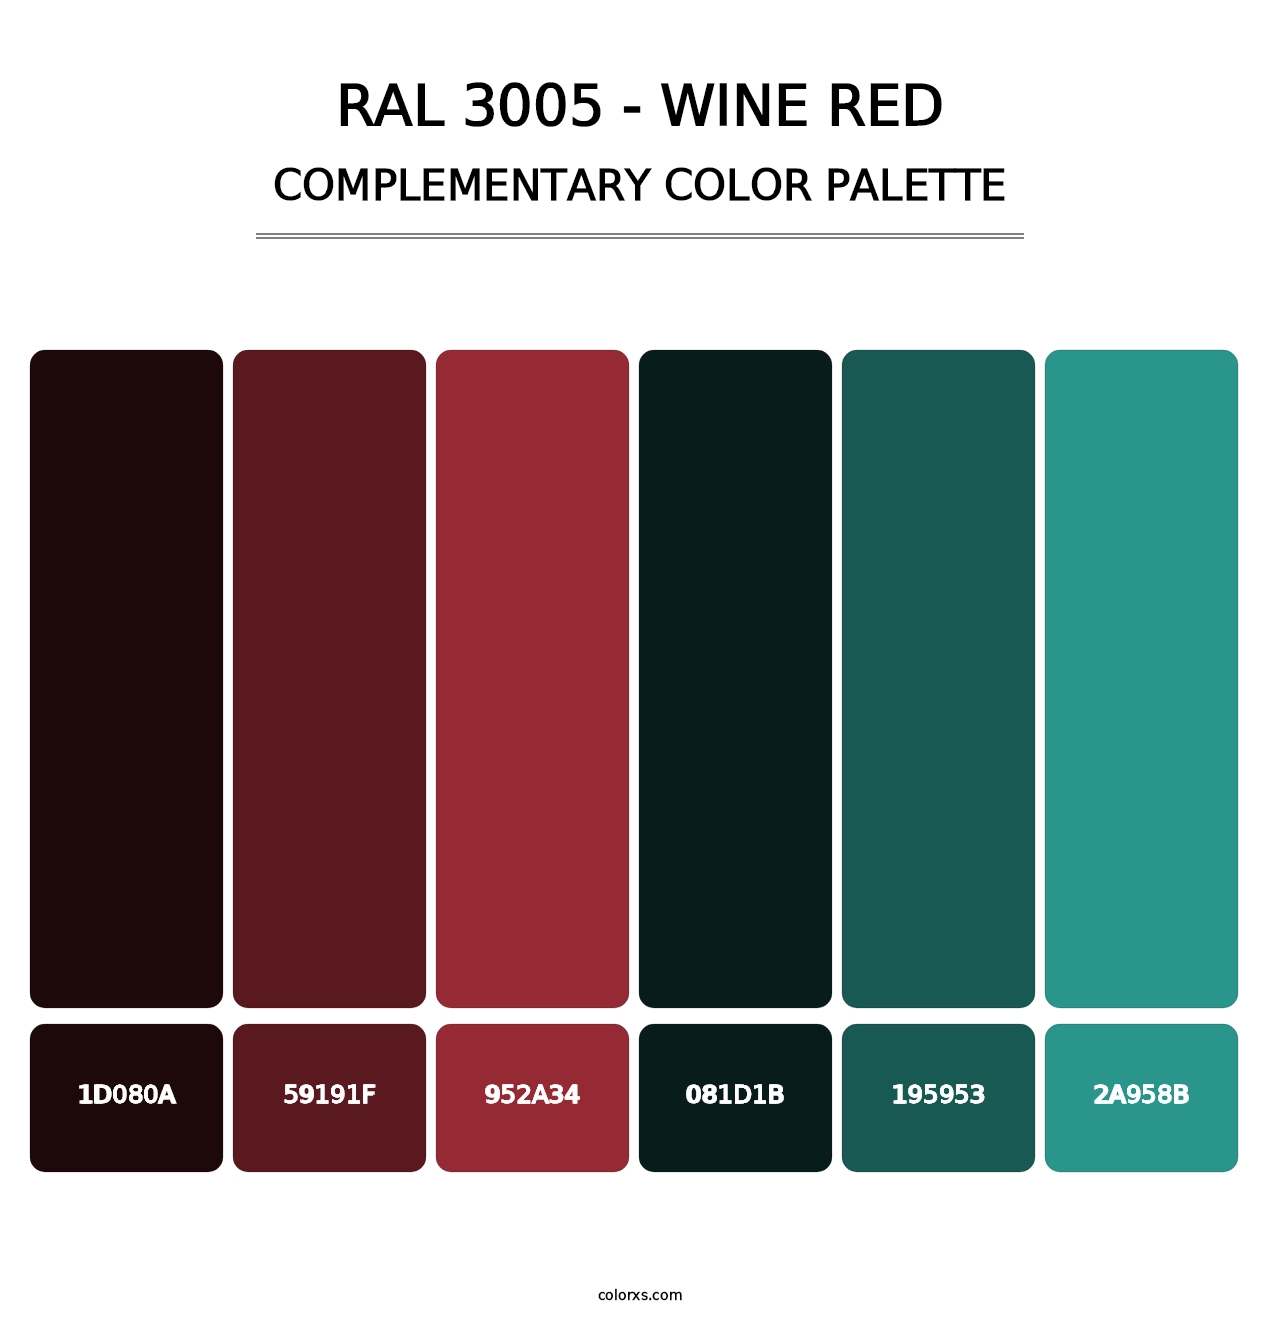 RAL 3005 - Wine Red - Complementary Color Palette